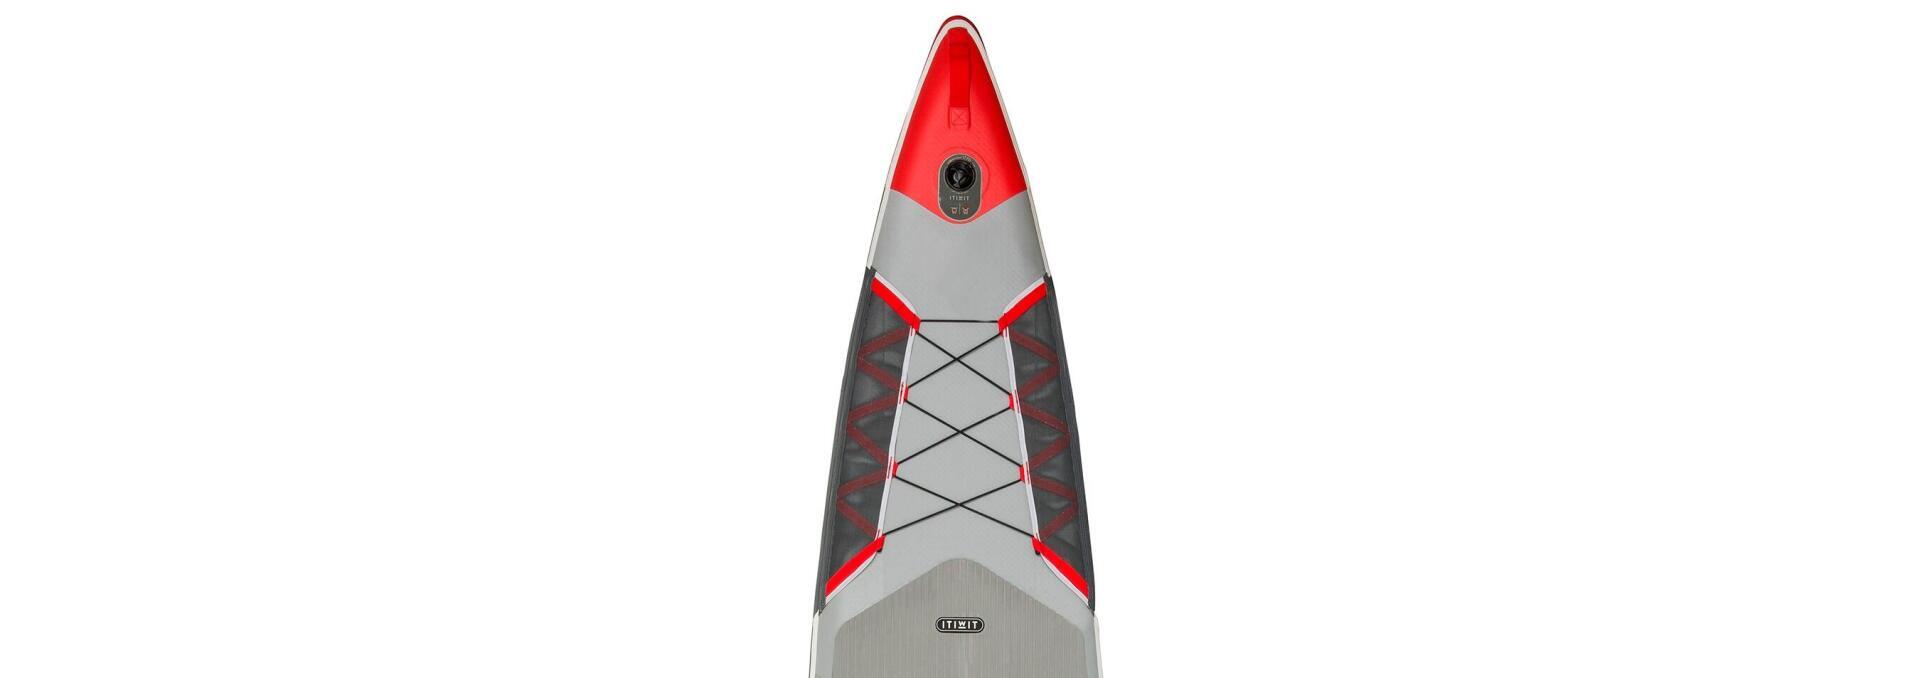 STAND-UP PADDLE GONFLABLE TOURING X500